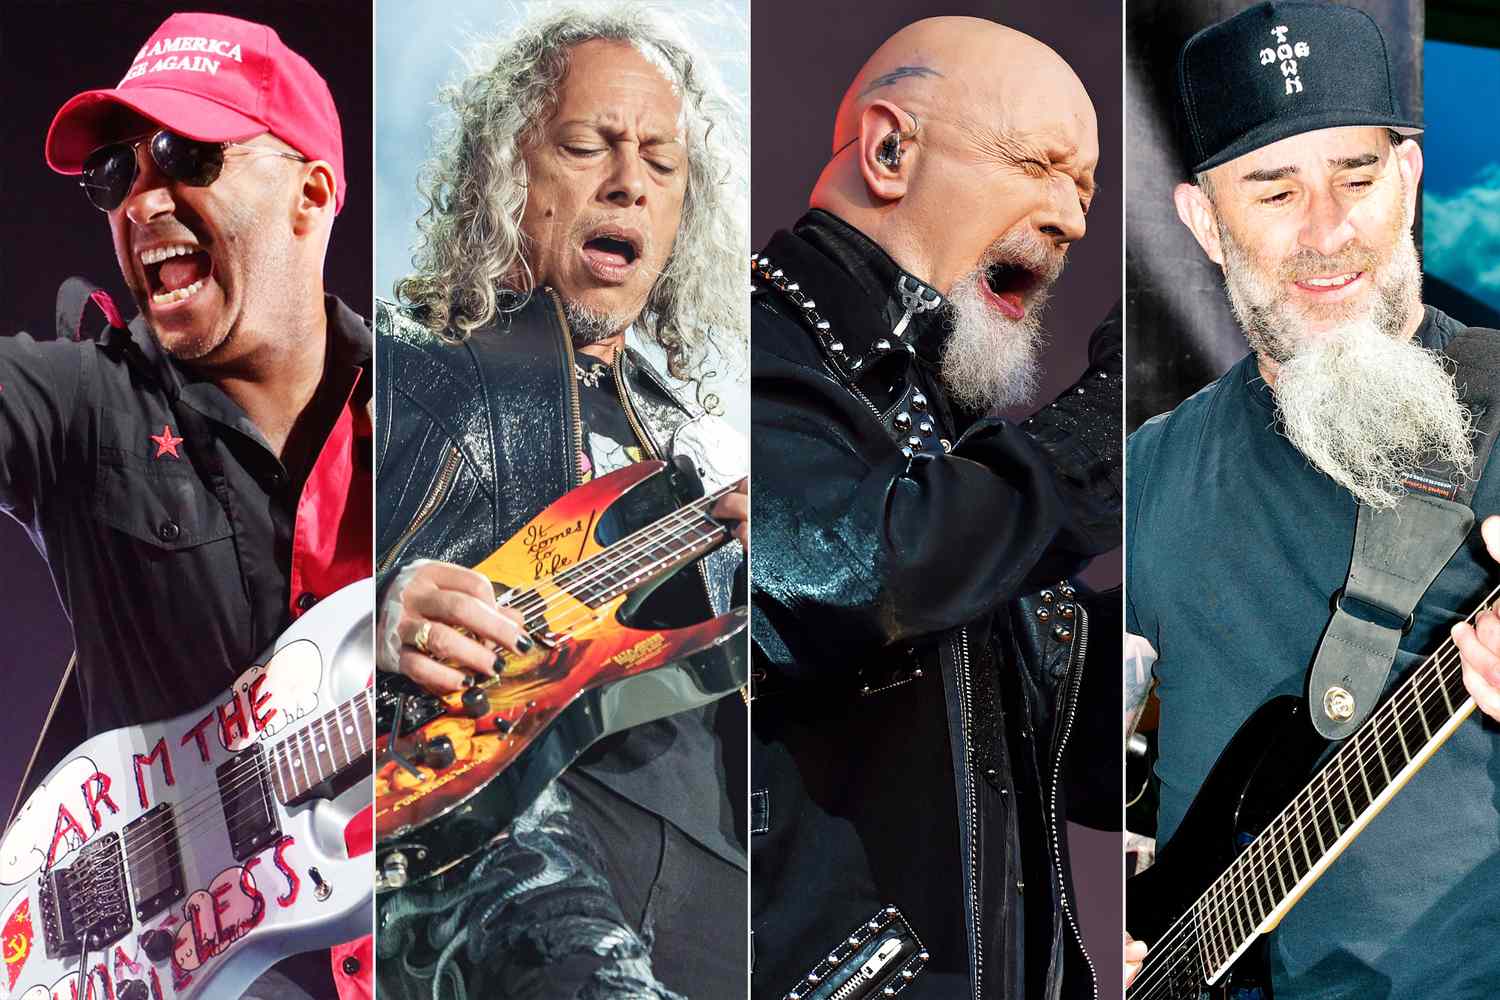 Tom Morello performing with Rage Against the Machine, Kirk Hammett performing with Metallica, Rob Halford performing with Judas Priest, and Scott Ian performing with Anthrax